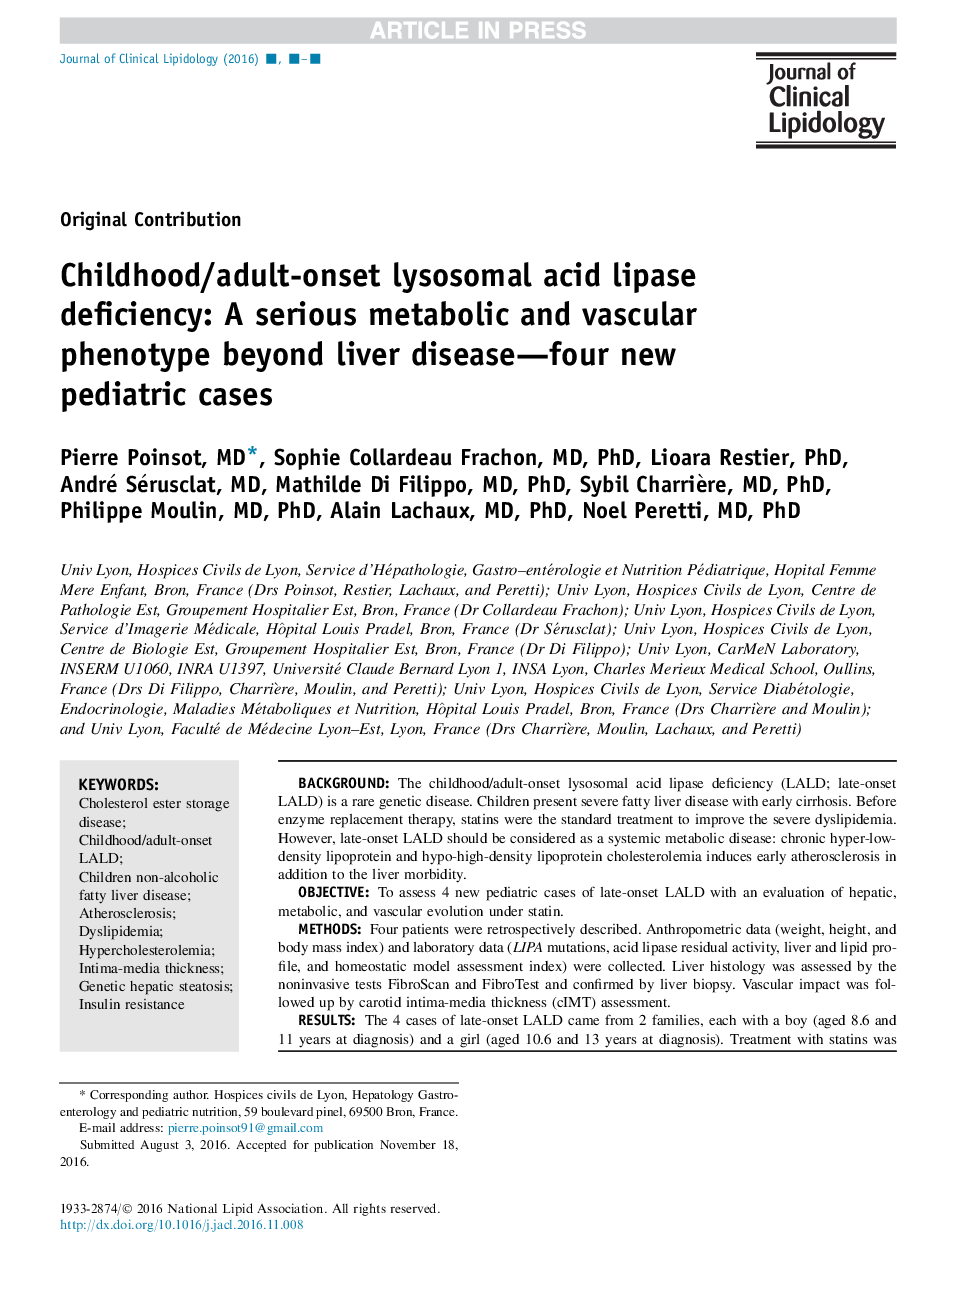 Childhood/adult-onset lysosomal acid lipase deficiency: A serious metabolic and vascular phenotype beyond liver disease-four new pediatric cases